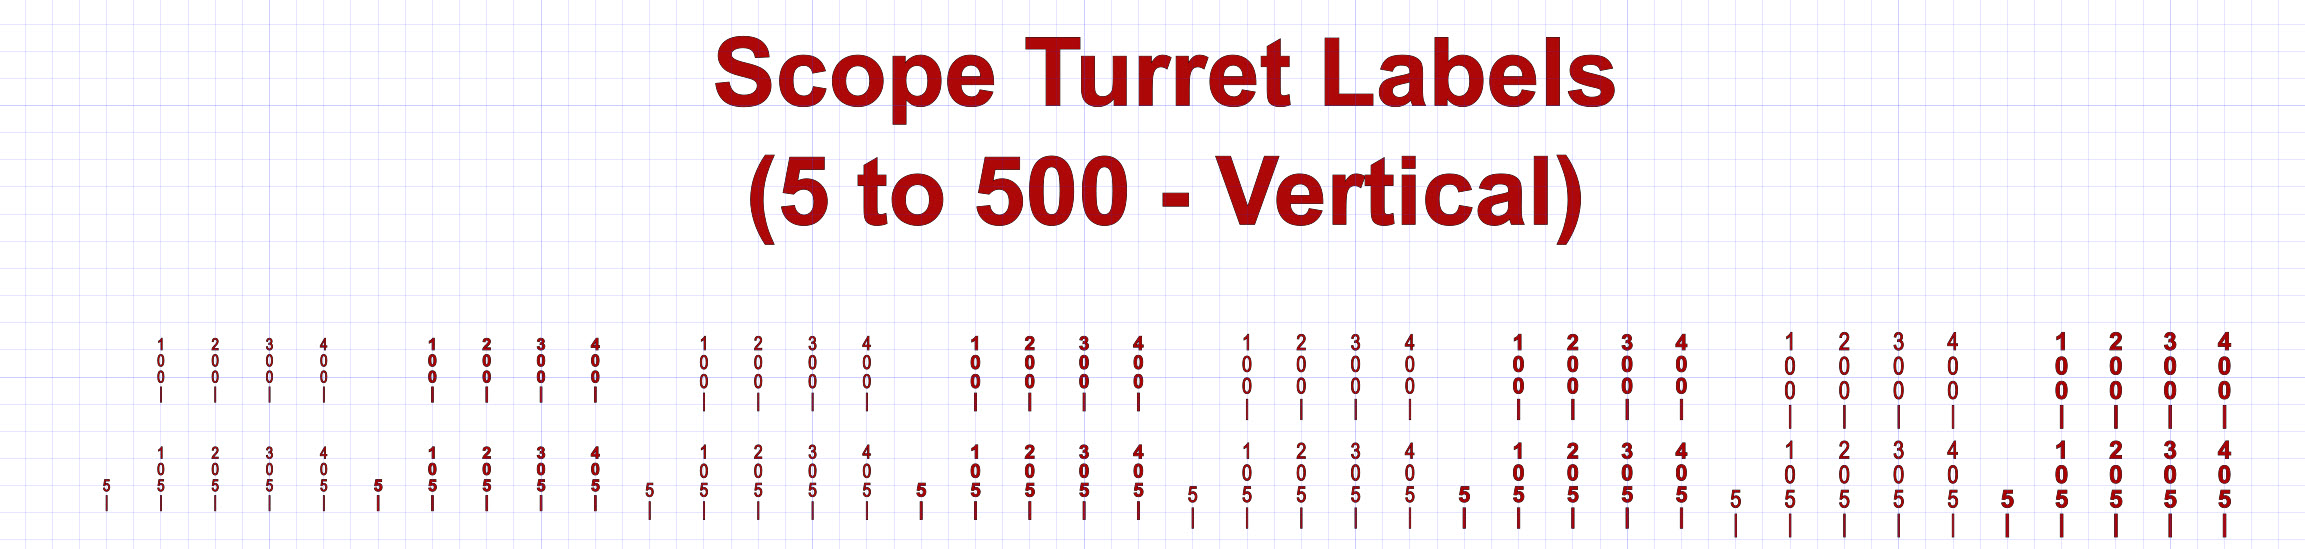 Scope Turret Labels (5 to 500 - Vertical).jpg